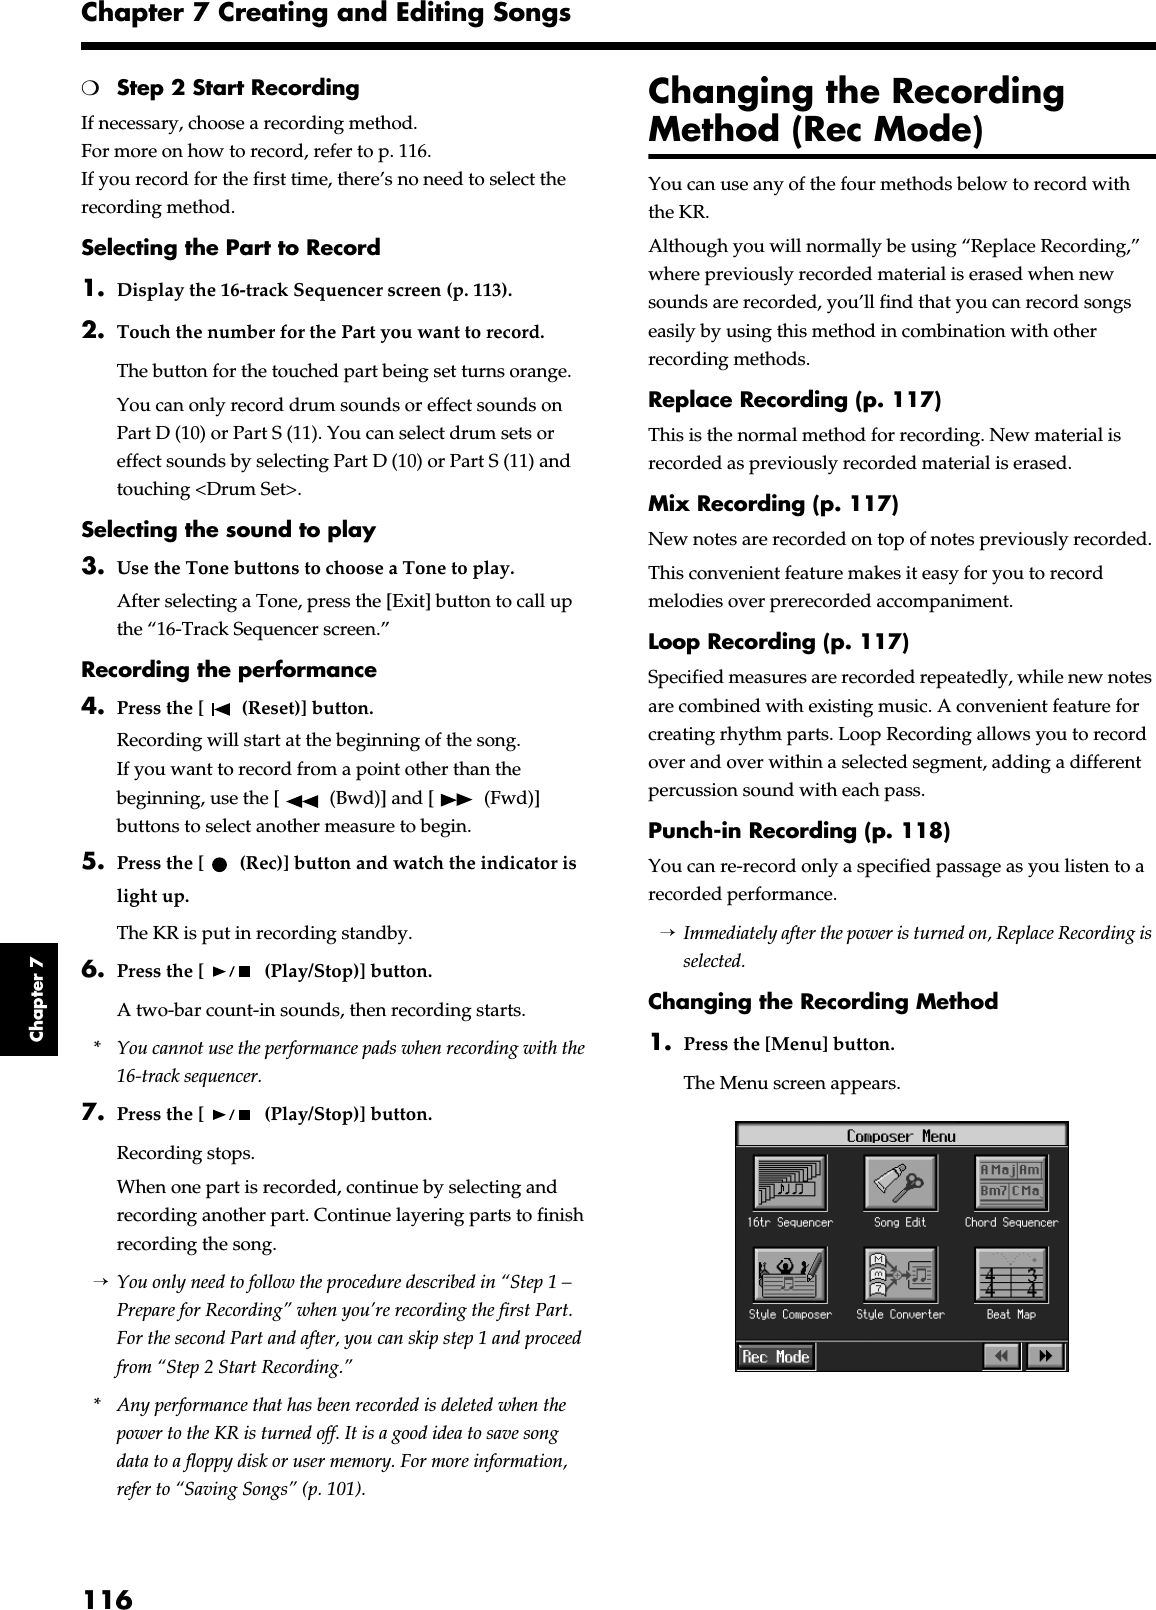 116Chapter 7 Creating and Editing SongsChapter 7❍Step 2 Start RecordingIf necessary, choose a recording method.For more on how to record, refer to p. 116.If you record for the first time, there’s no need to select the recording method.Selecting the Part to Record1. Display the 16-track Sequencer screen (p. 113).2. Touch the number for the Part you want to record.The button for the touched part being set turns orange.You can only record drum sounds or effect sounds on Part D (10) or Part S (11). You can select drum sets or effect sounds by selecting Part D (10) or Part S (11) and touching &lt;Drum Set&gt;.Selecting the sound to play3. Use the Tone buttons to choose a Tone to play.After selecting a Tone, press the [Exit] button to call up the “16-Track Sequencer screen.”Recording the performance4. Press the [  (Reset)] button.Recording will start at the beginning of the song.If you want to record from a point other than the beginning, use the [  (Bwd)] and [  (Fwd)] buttons to select another measure to begin.5. Press the [  (Rec)] button and watch the indicator is light up.The KR is put in recording standby.6. Press the [  (Play/Stop)] button.A two-bar count-in sounds, then recording starts.* You cannot use the performance pads when recording with the 16-track sequencer.7. Press the [  (Play/Stop)] button.Recording stops.When one part is recorded, continue by selecting and recording another part. Continue layering parts to finish recording the song.→You only need to follow the procedure described in “Step 1 – Prepare for Recording” when you’re recording the first Part. For the second Part and after, you can skip step 1 and proceed from “Step 2 Start Recording.”* Any performance that has been recorded is deleted when the power to the KR is turned off. It is a good idea to save song data to a floppy disk or user memory. For more information, refer to “Saving Songs” (p. 101).Changing the Recording Method (Rec Mode)You can use any of the four methods below to record with the KR.Although you will normally be using “Replace Recording,” where previously recorded material is erased when new sounds are recorded, you’ll find that you can record songs easily by using this method in combination with other recording methods.Replace Recording (p. 117)This is the normal method for recording. New material is recorded as previously recorded material is erased.Mix Recording (p. 117)New notes are recorded on top of notes previously recorded.This convenient feature makes it easy for you to record melodies over prerecorded accompaniment.Loop Recording (p. 117)Specified measures are recorded repeatedly, while new notes are combined with existing music. A convenient feature for creating rhythm parts. Loop Recording allows you to record over and over within a selected segment, adding a different percussion sound with each pass.Punch-in Recording (p. 118)You can re-record only a specified passage as you listen to a recorded performance.→Immediately after the power is turned on, Replace Recording is selected.Changing the Recording Method1. Press the [Menu] button.The Menu screen appears.fig.d-menu1.eps_50